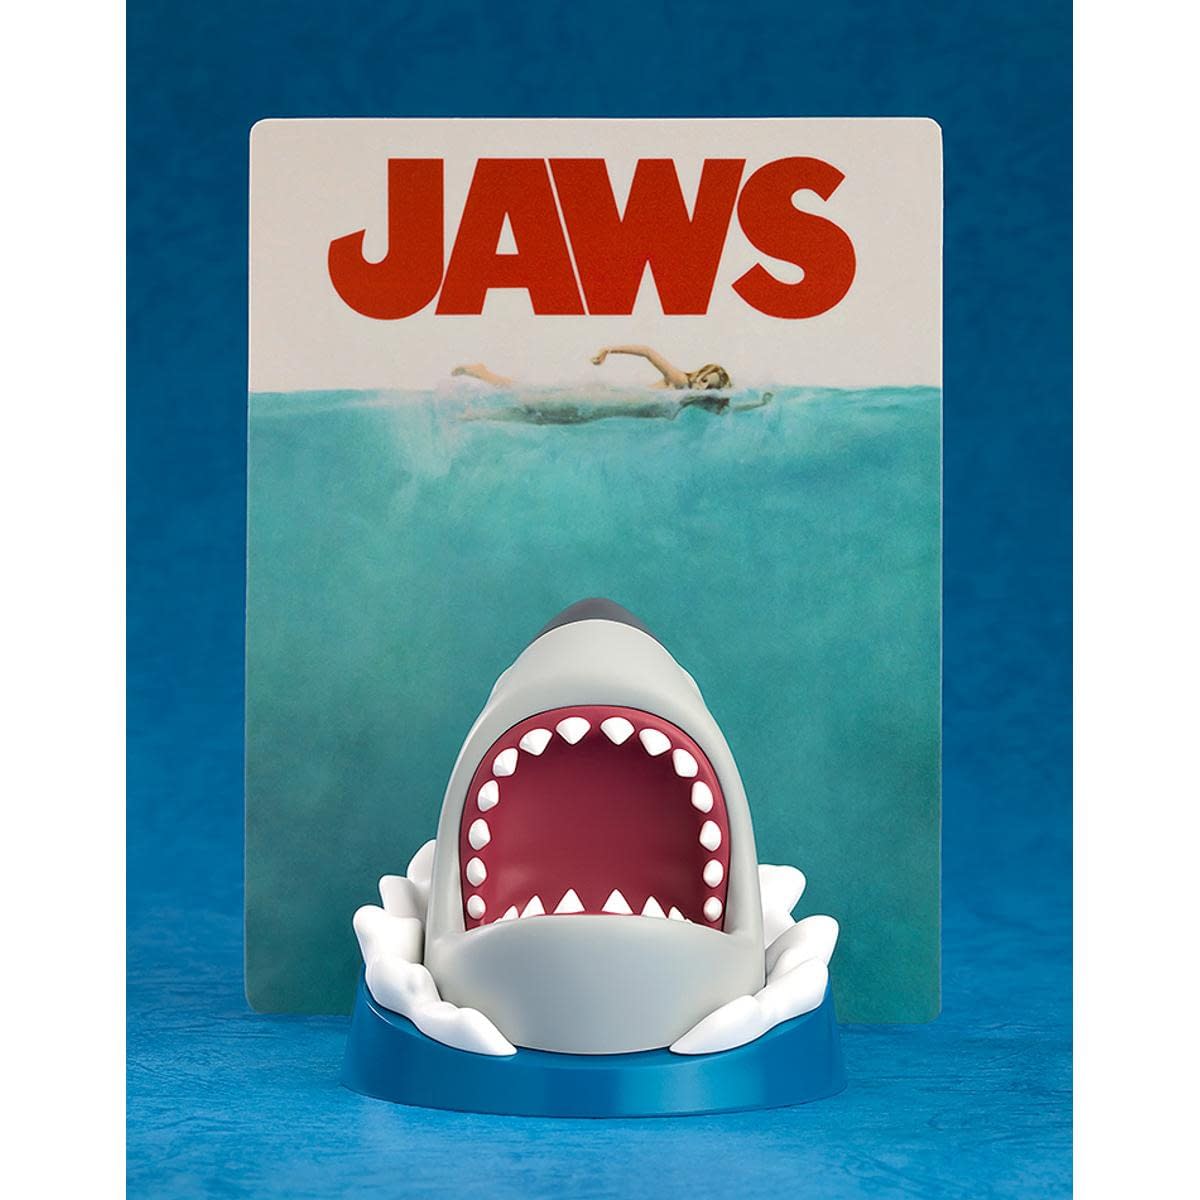 LEGO 'Jaws' Set Surfaces With Fishing Boat And Iconic Giant Shark